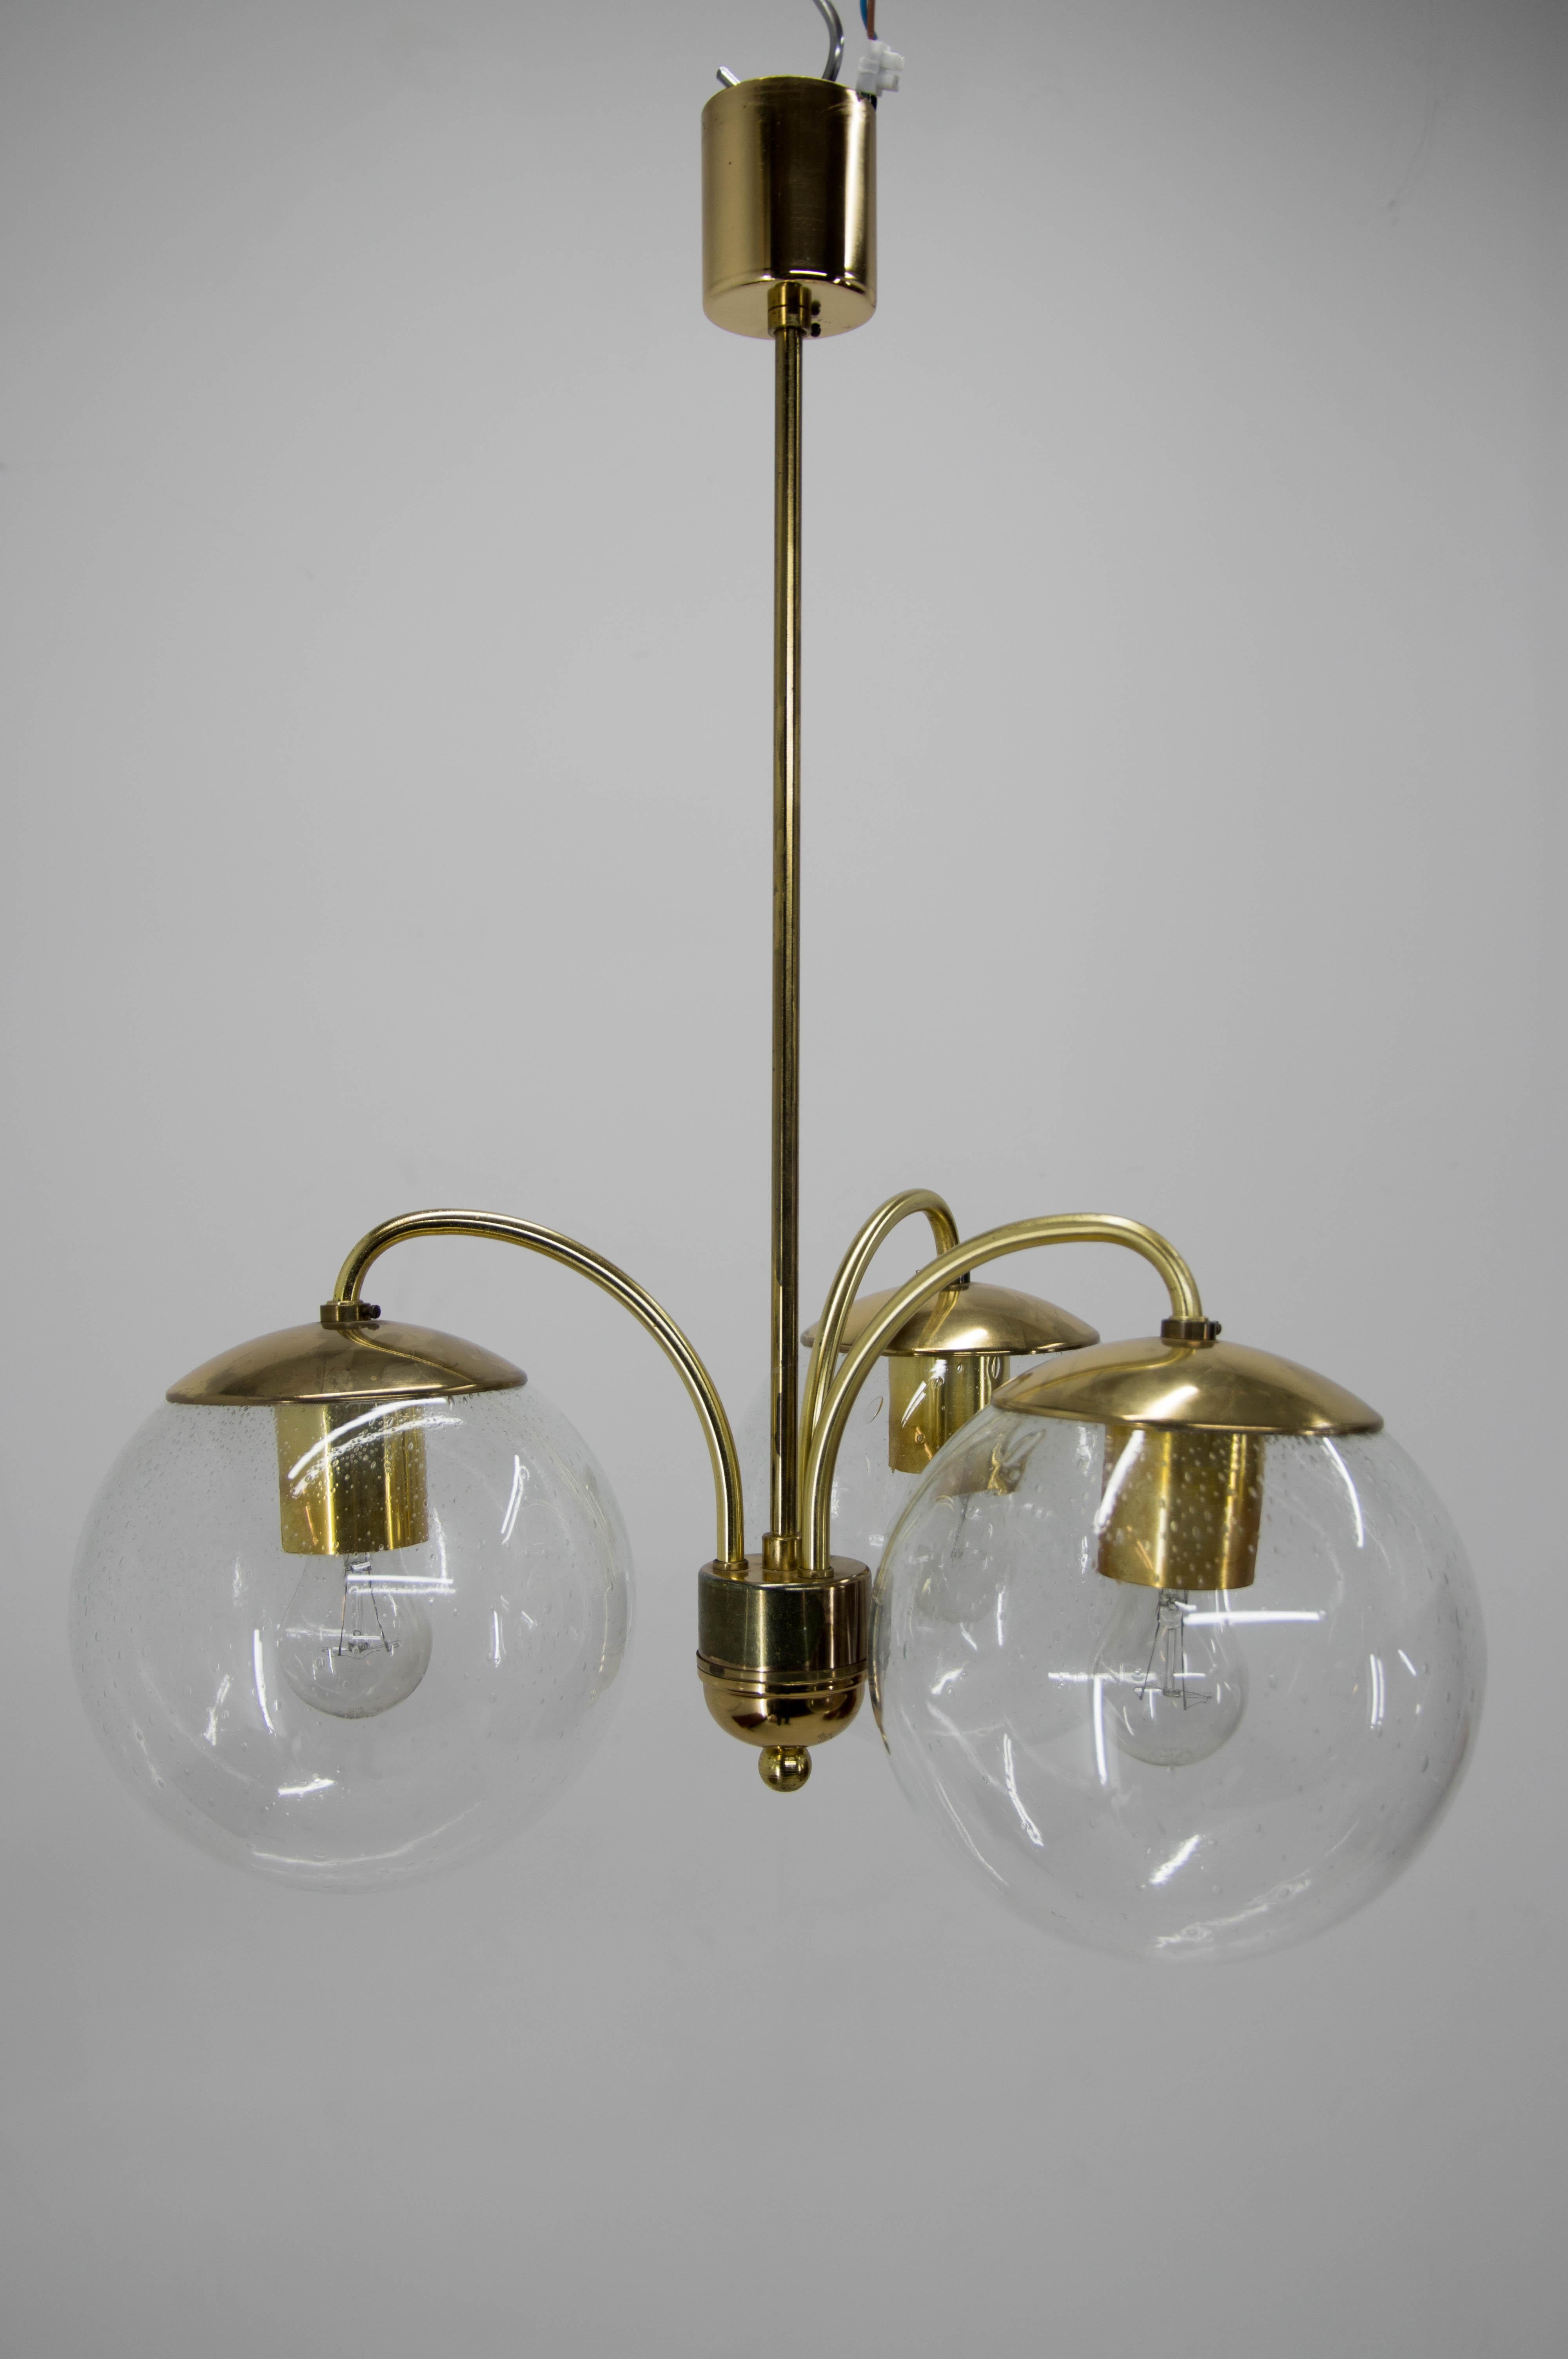 Made of brass and blown bubble glass
3 x 60W, E25-E27 bulbs
US wiring compatible
Good original condition, polished
Diameter of the globe 20cm.